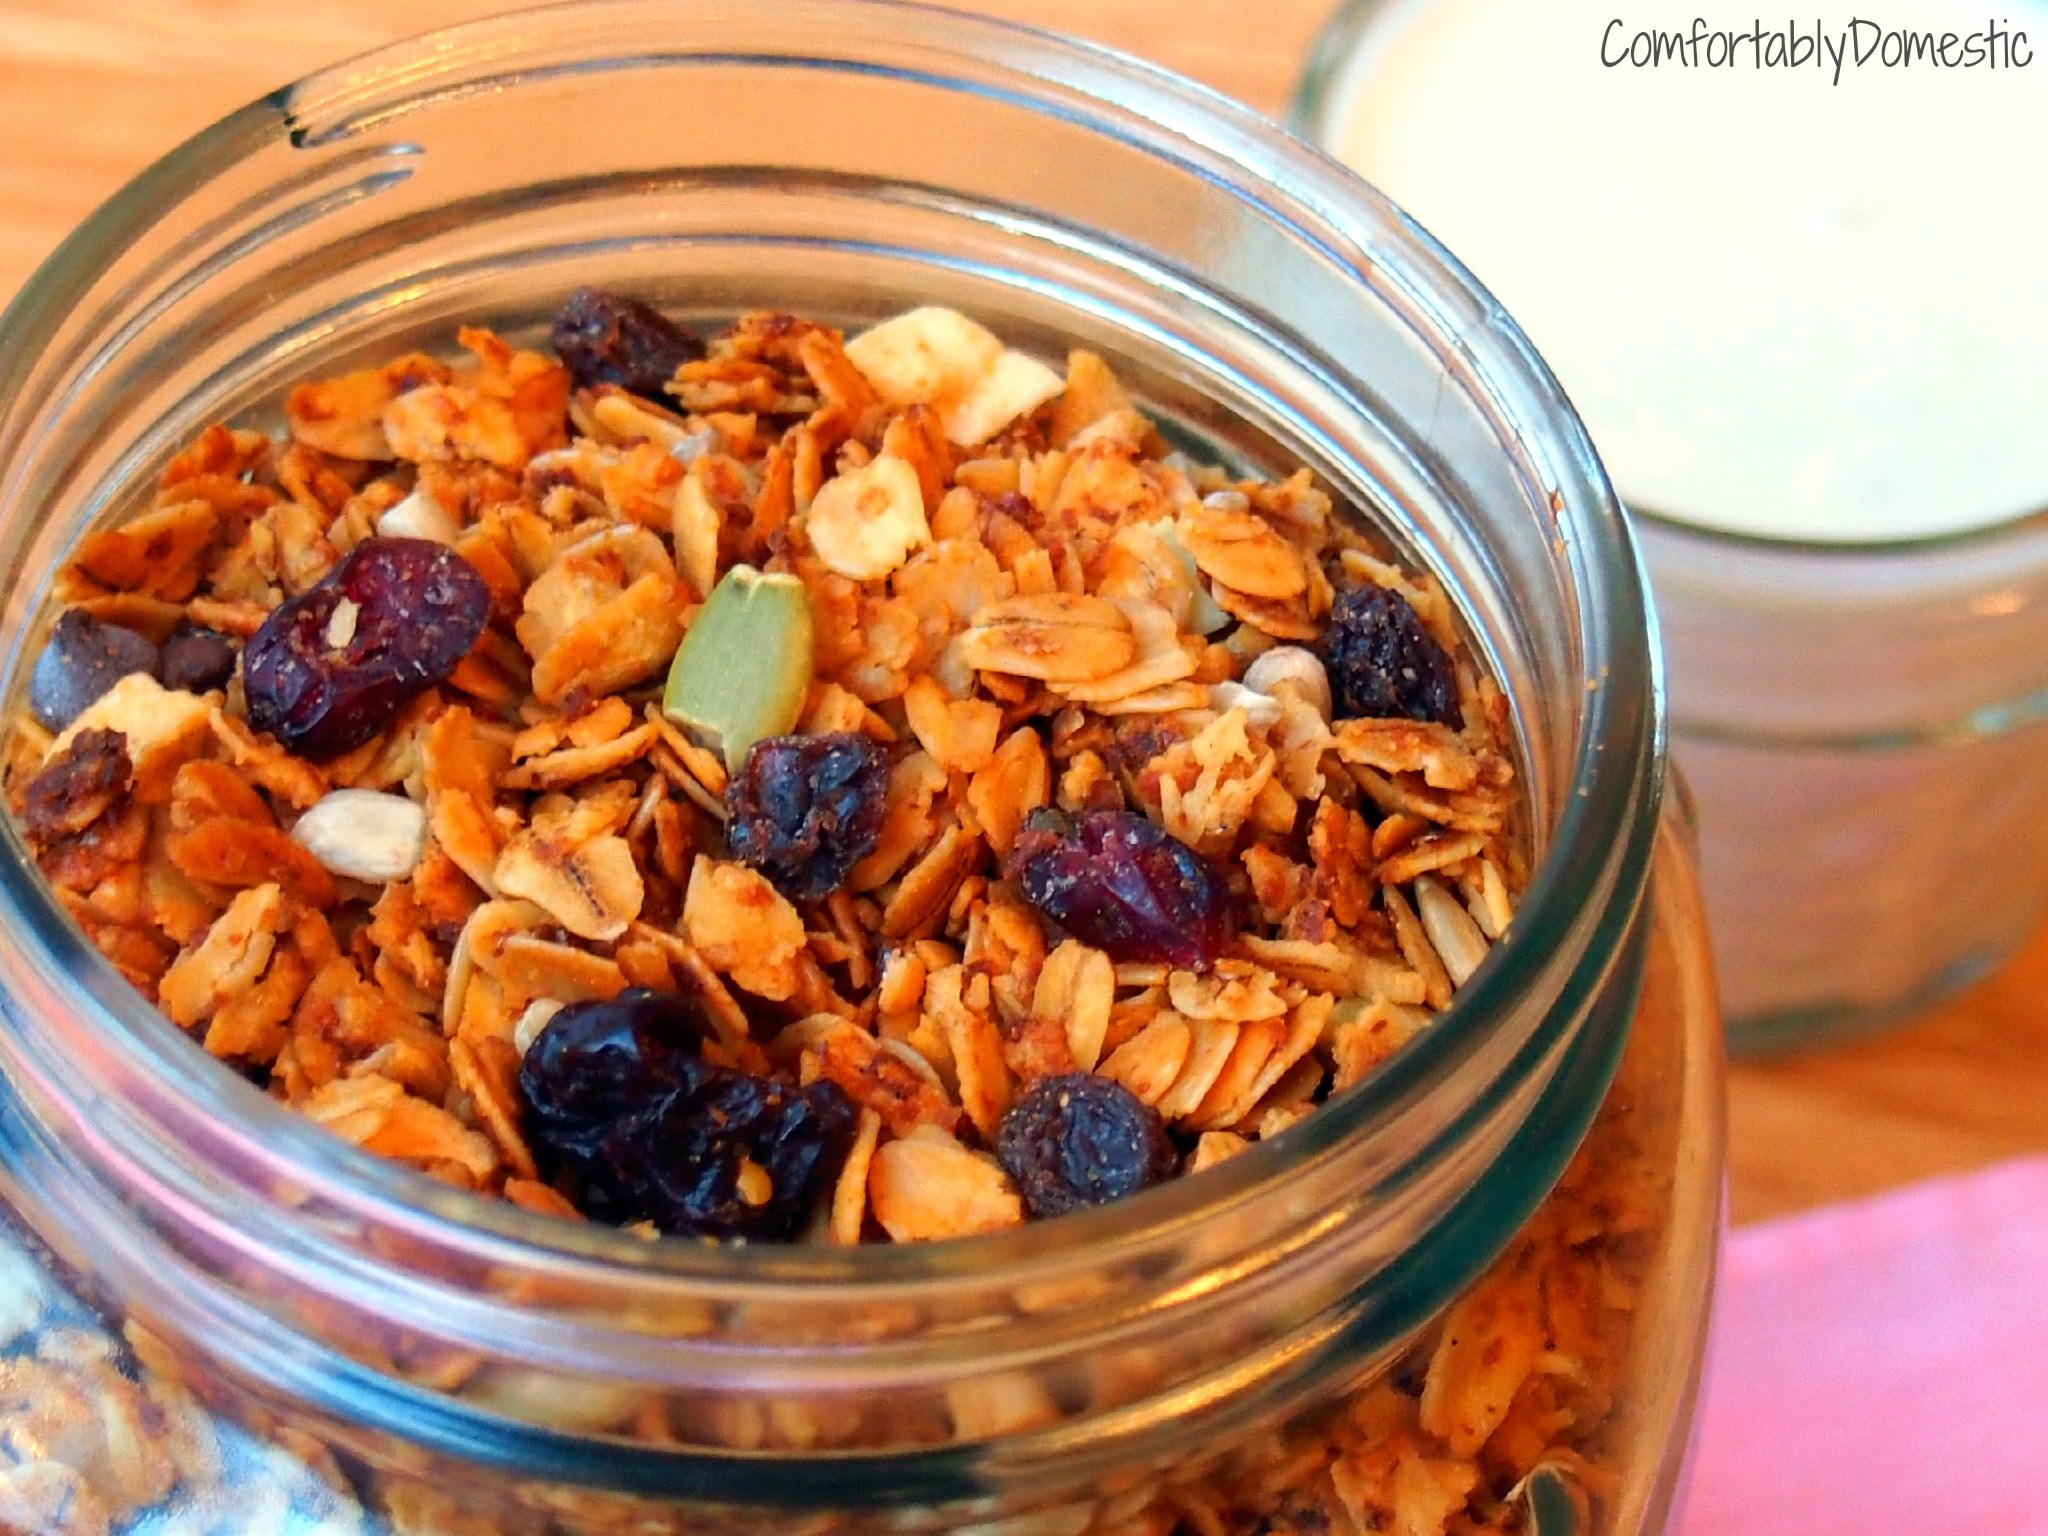 Nut-free Granola | ComfortablyDomestic.com is packed with protein and allergy friendly.